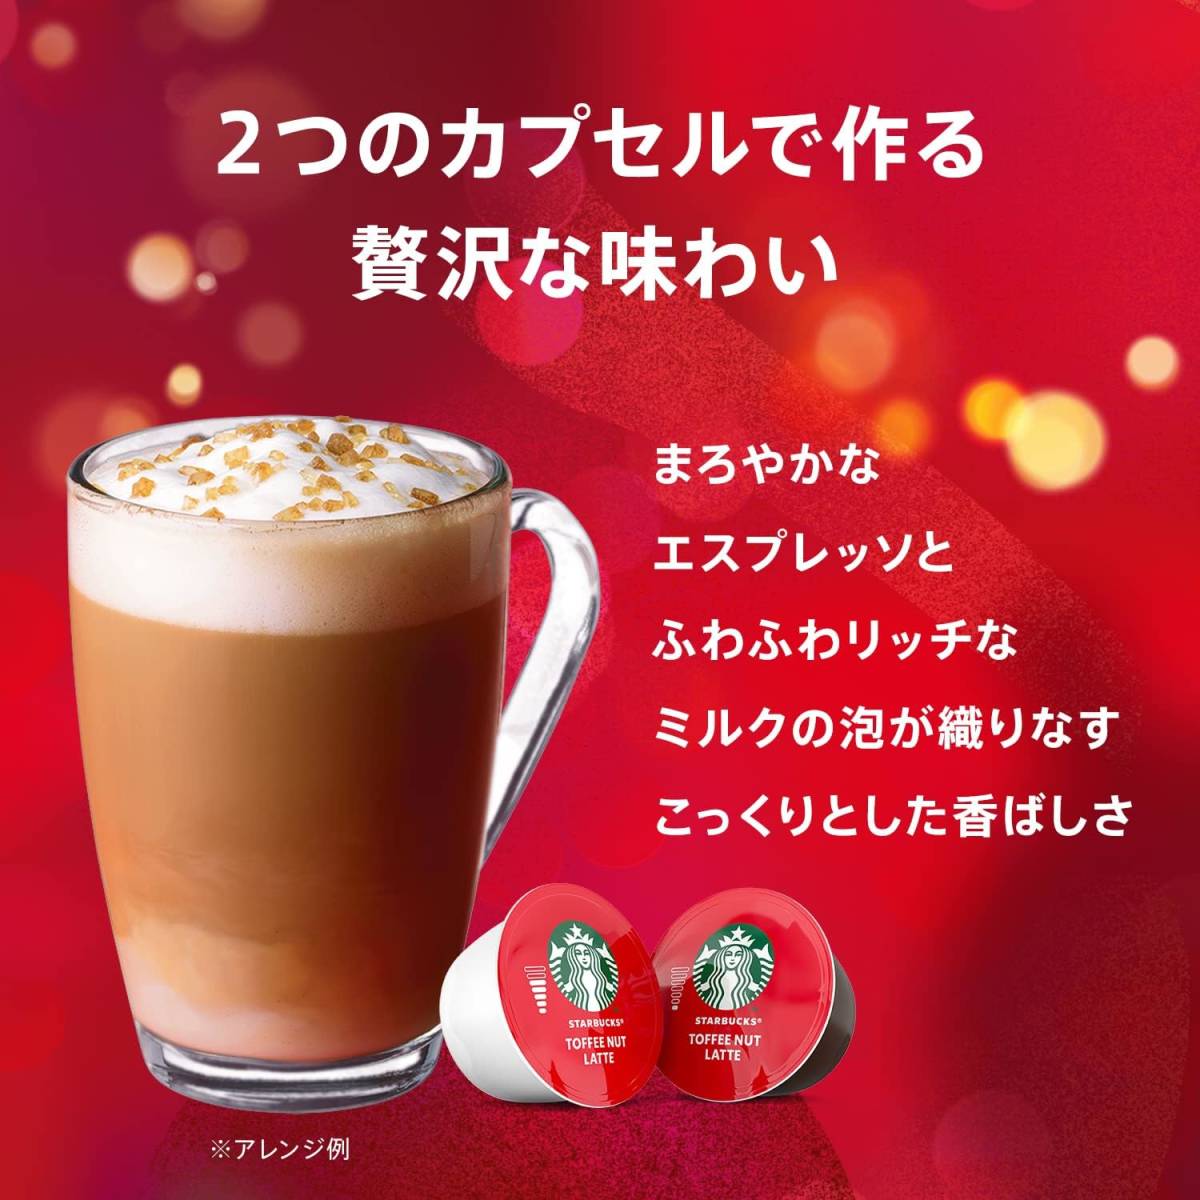 6 cup minute Starbucks( Starbucks )tofi- nuts Latte nes Cafe Dolce Gusto exclusive use Capsule 12P×1 box 